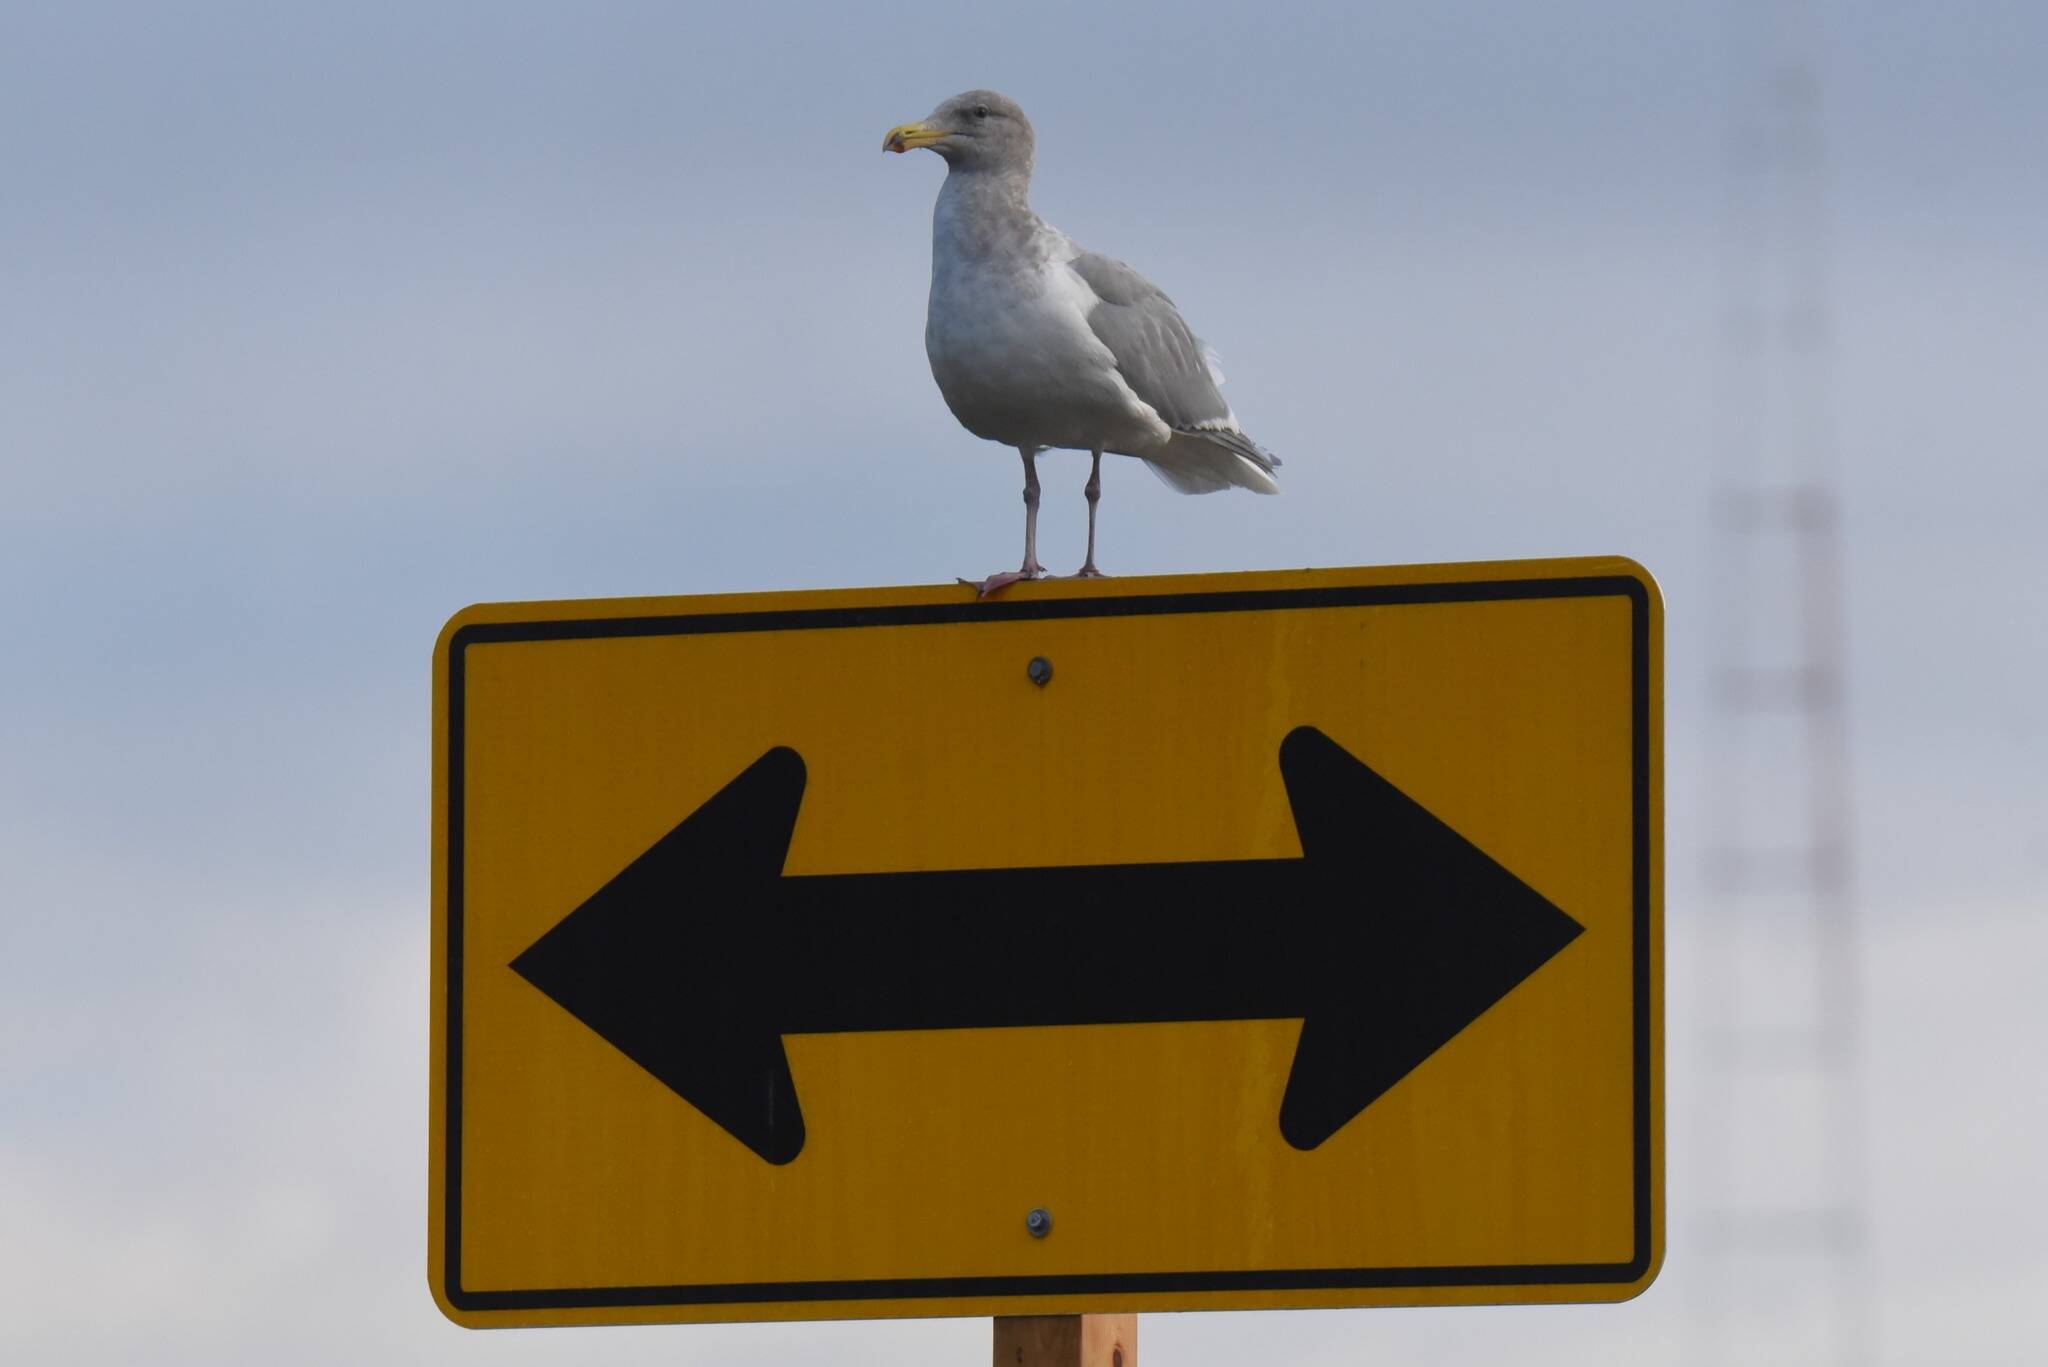 A glaucous-winged gull considers its next direction in life. Jim Diers photo